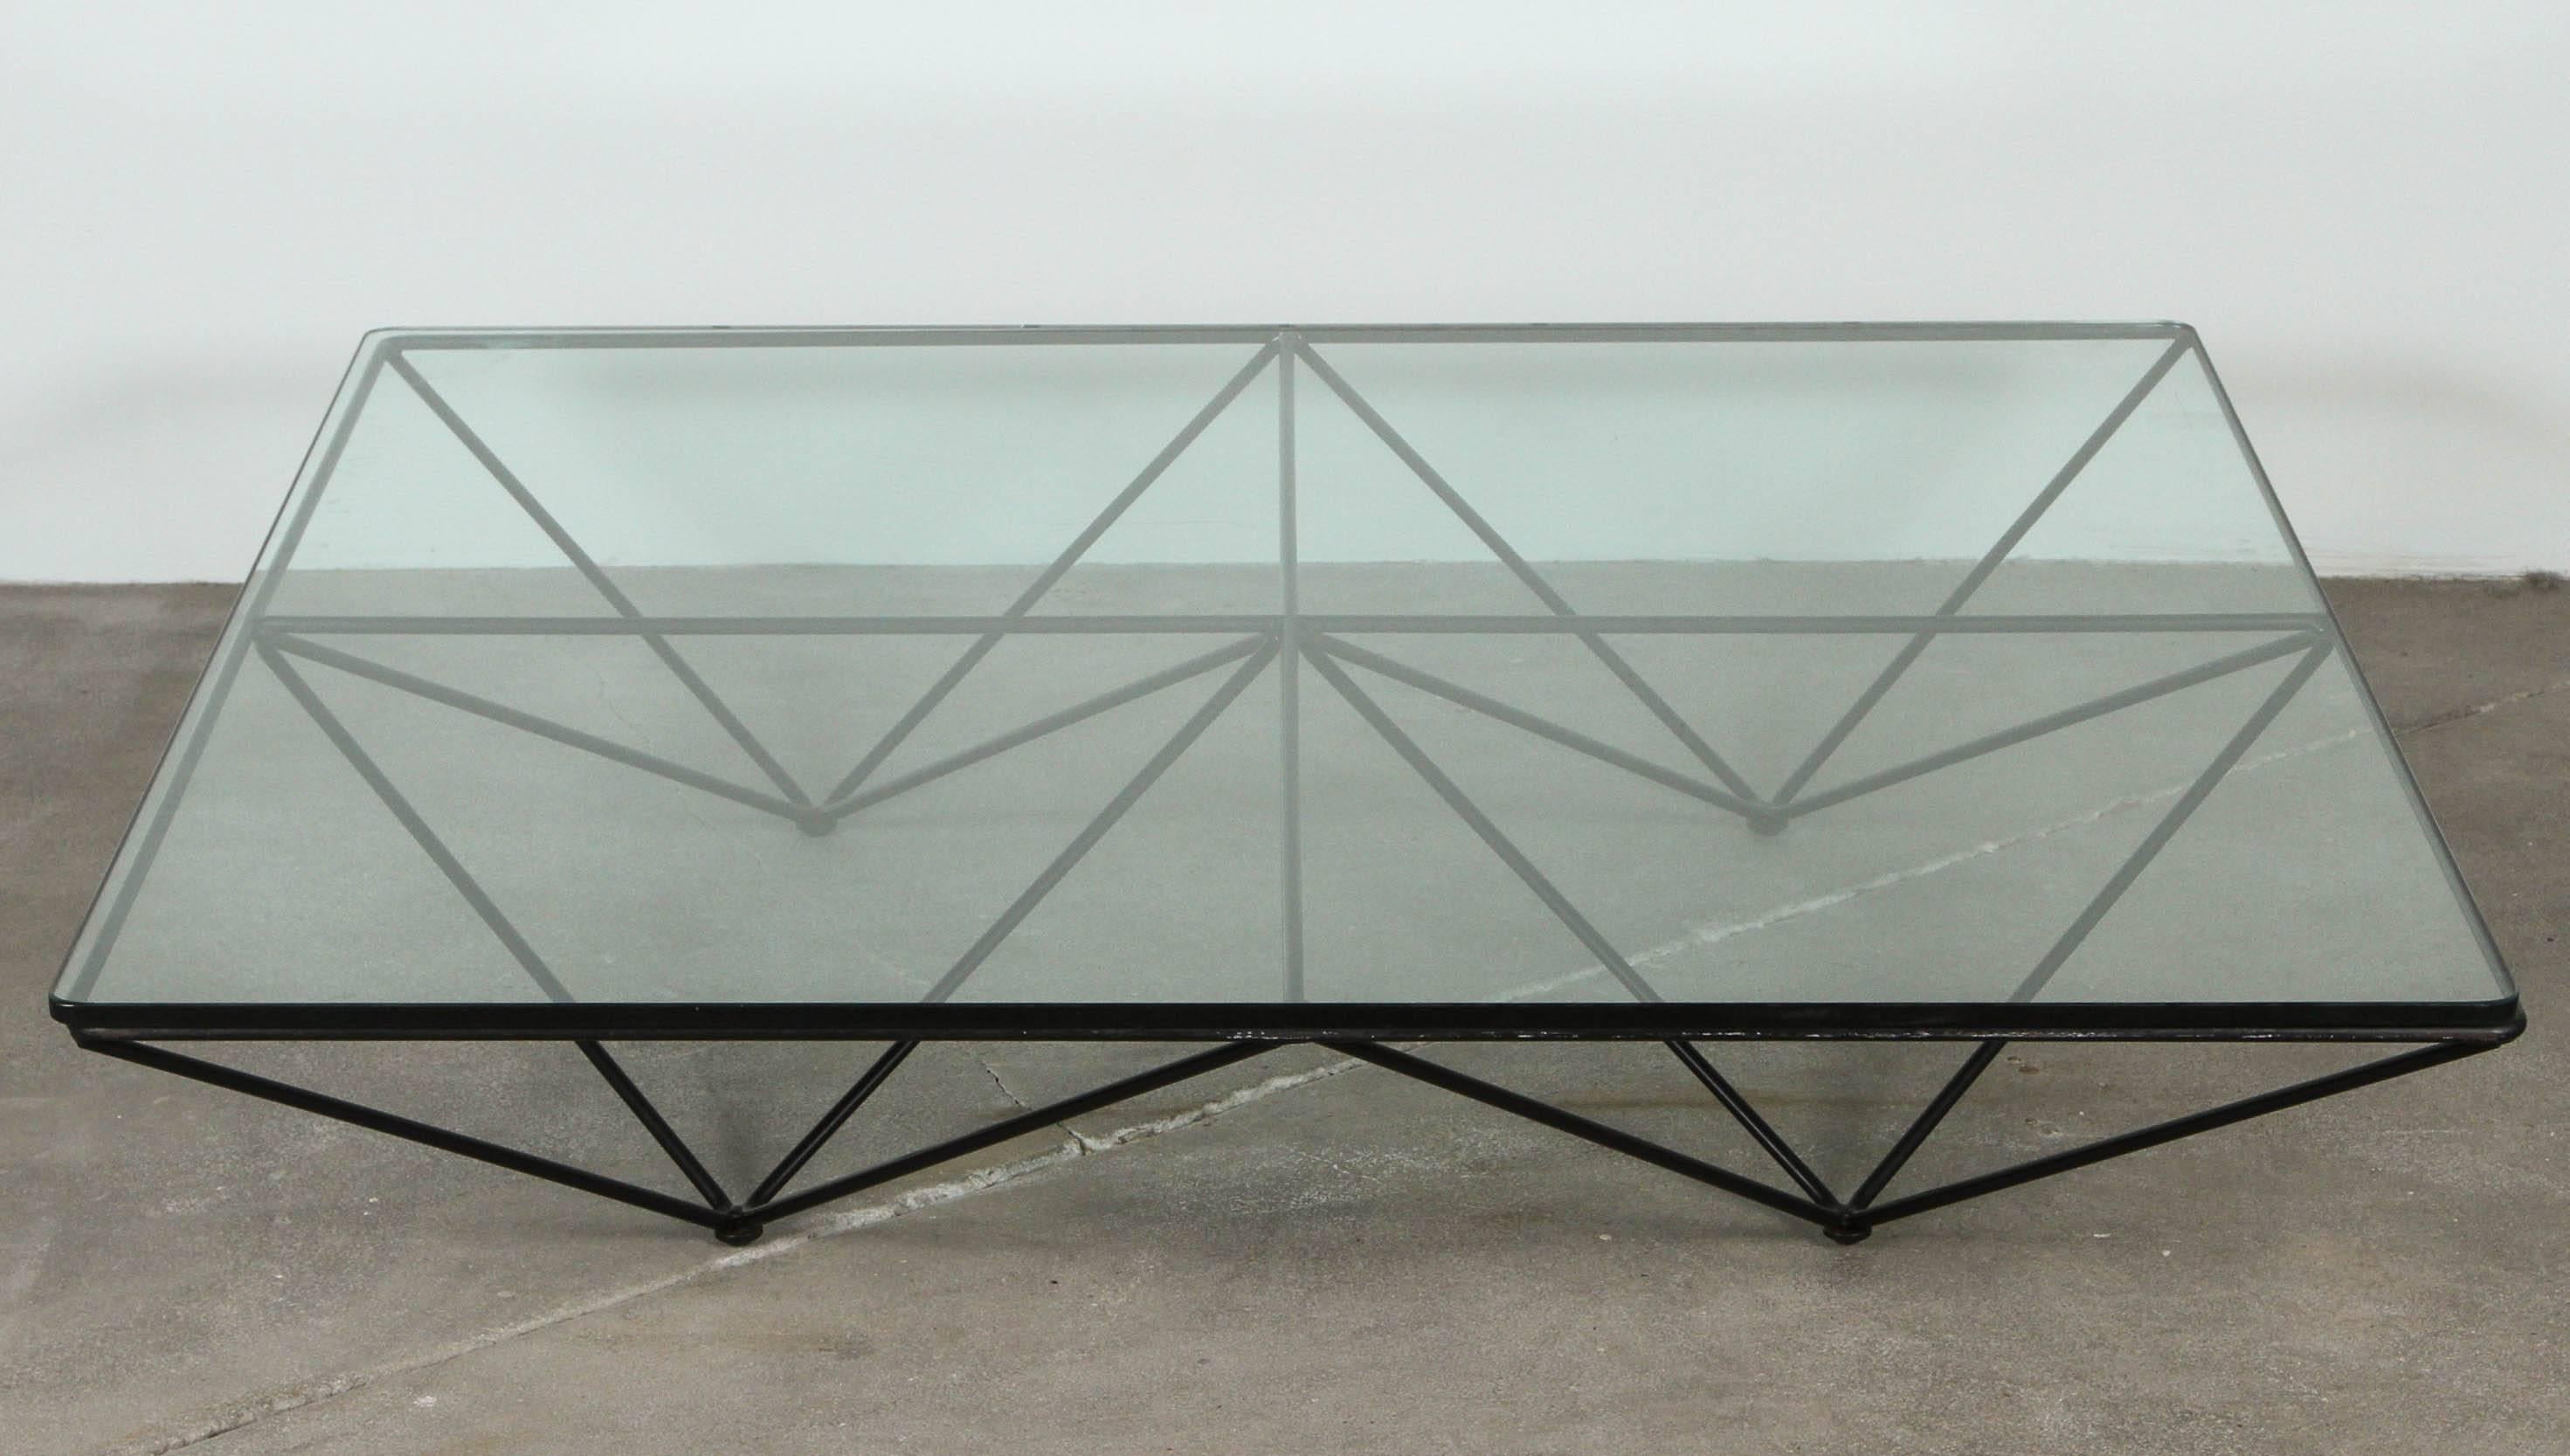 Italian metal and glass coffee table by Paolo Piva for B&B, Italia.